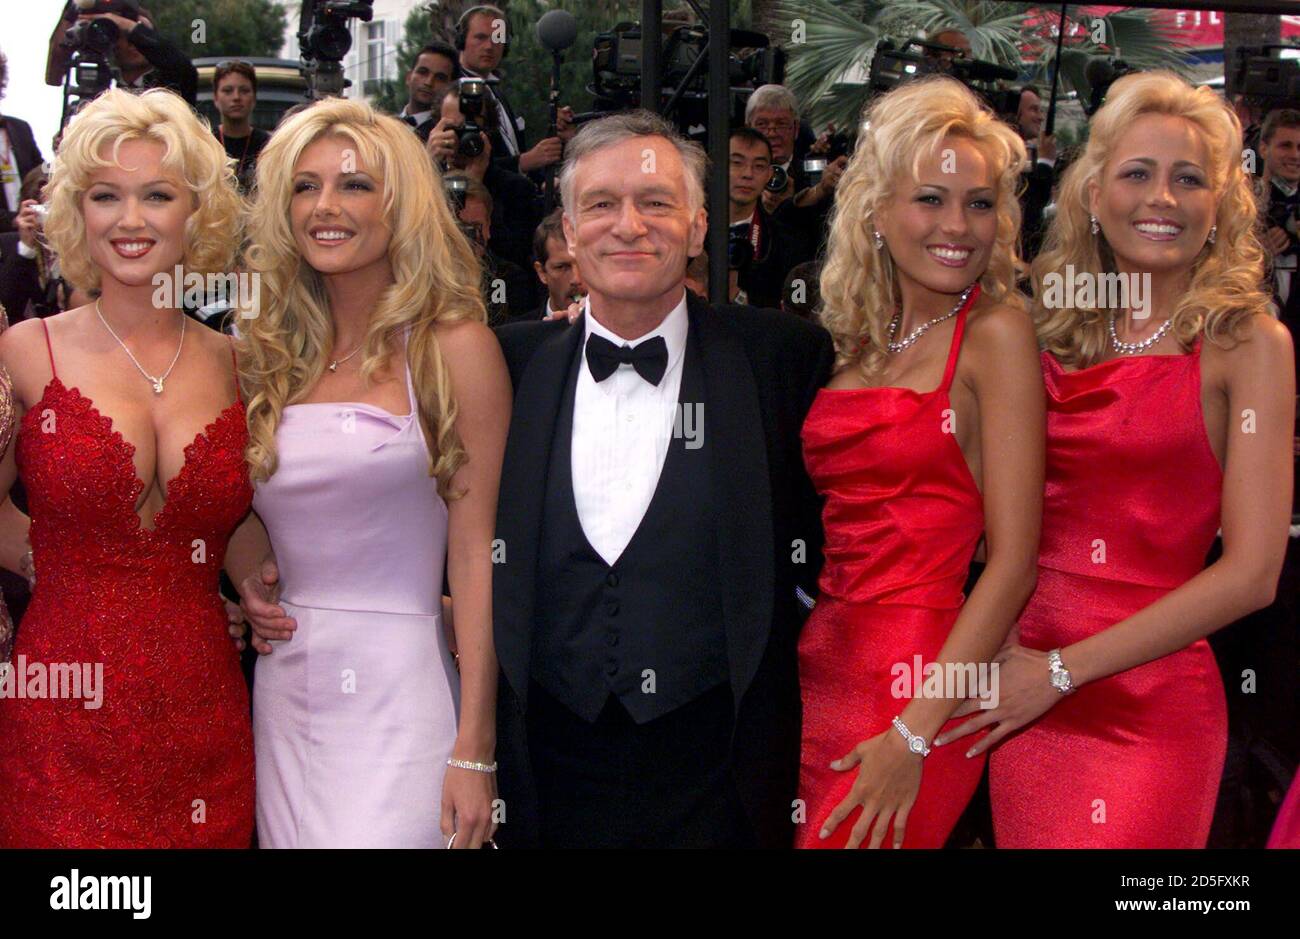 Hugh Hefner (C) founder of Playboy magazine, is escorted by unidentified  models as he arrives for the evening screening at the 52nd Cannes Film  Festival. Hefner returns to Cannes where he will